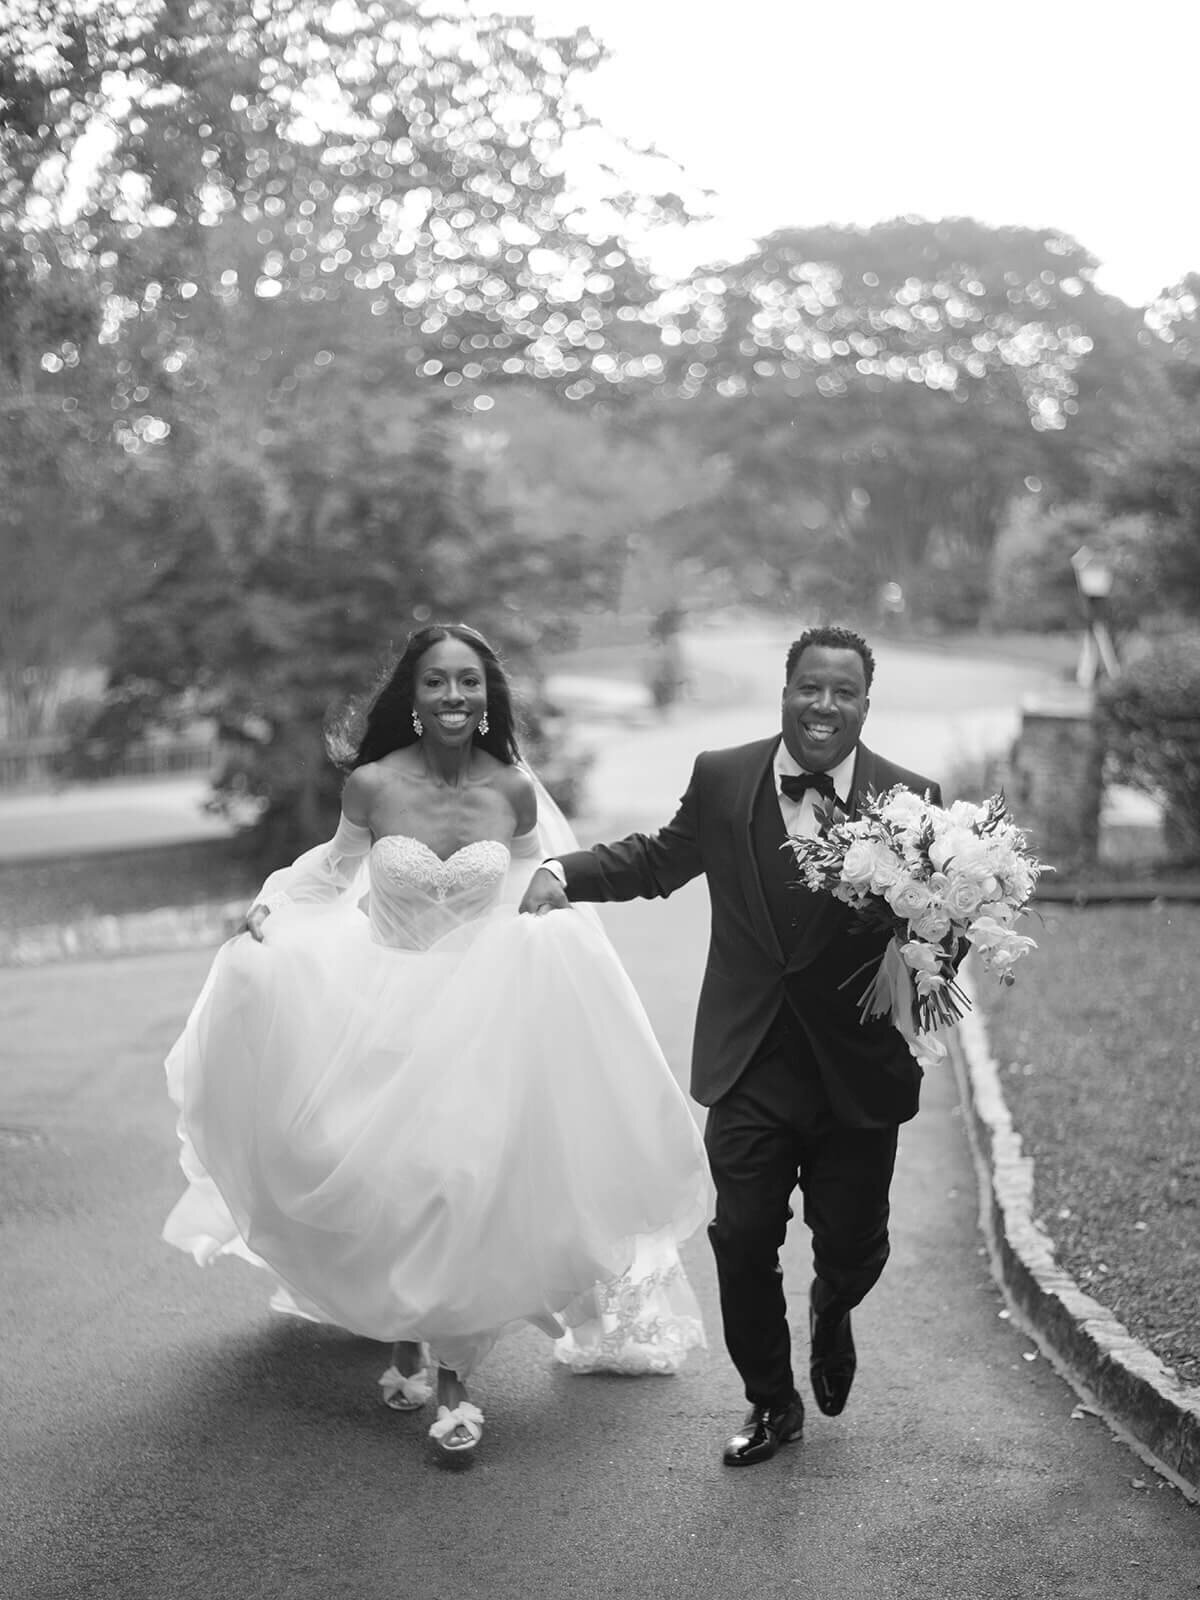 tinted-events-design-and-planning-callanwolde-wedding-planner-elizabeth-austin-photography-18-tintedevents.com